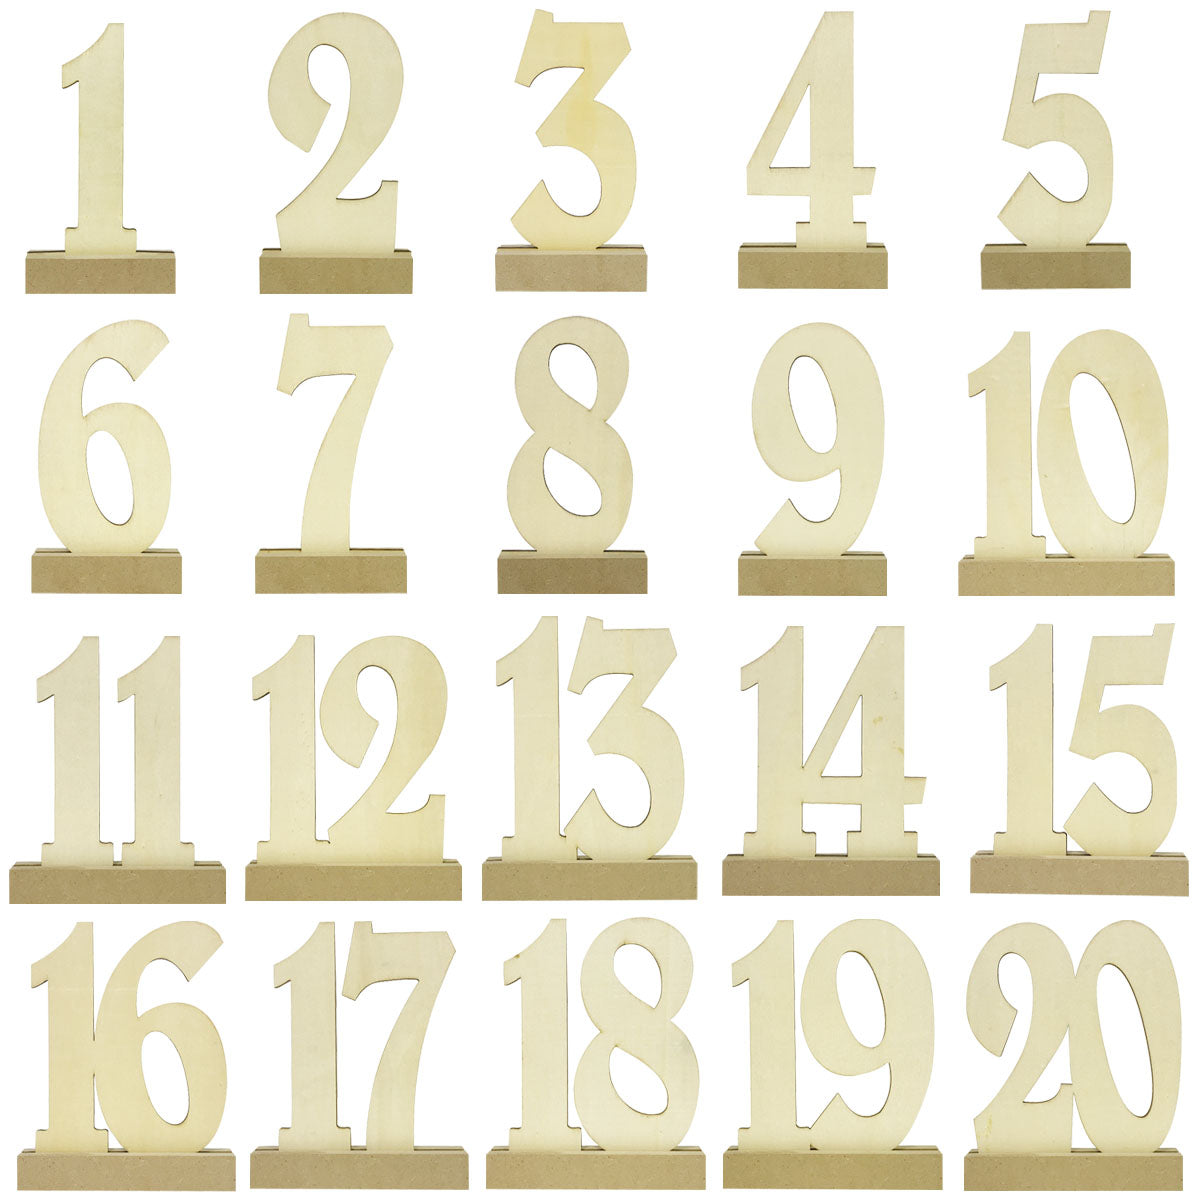 Wrapables Vintage Wooden Table Numbers with Base for Wedding, Parties, Holidays, Special Events Table Decor (Set of 20)